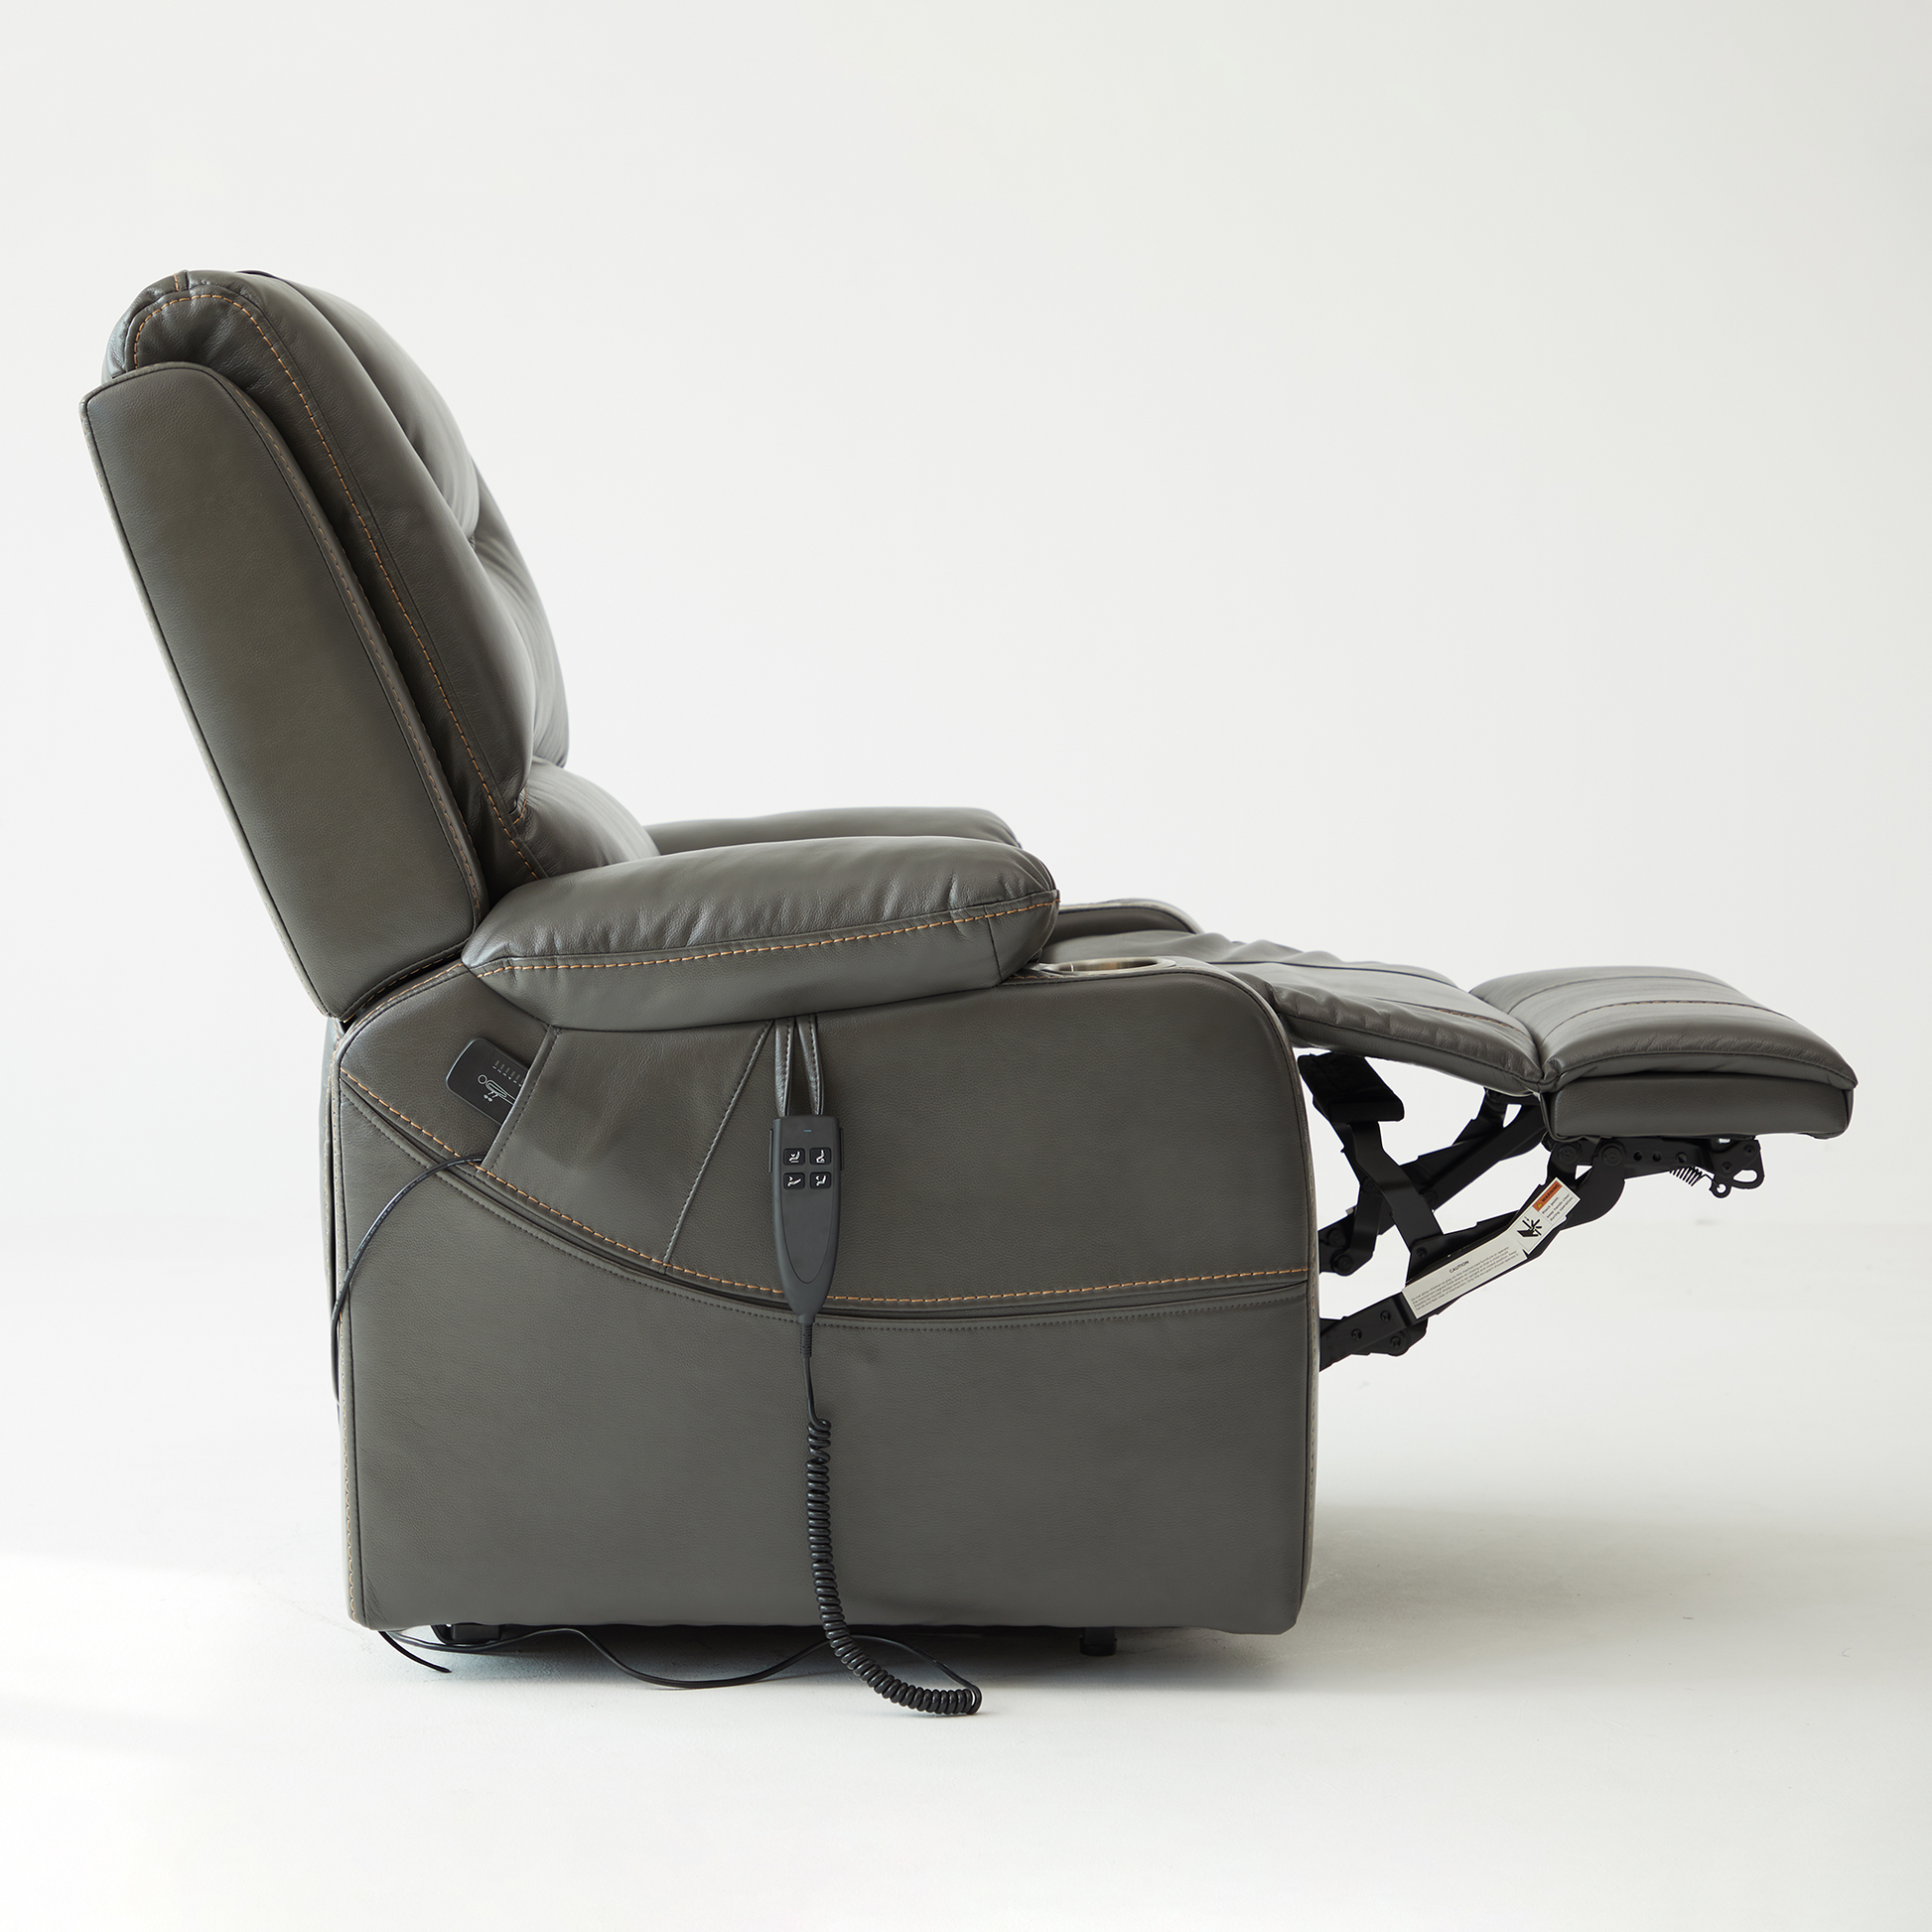 Lay Flat Power Lift Recliner With Cup Holder Heating&Massage